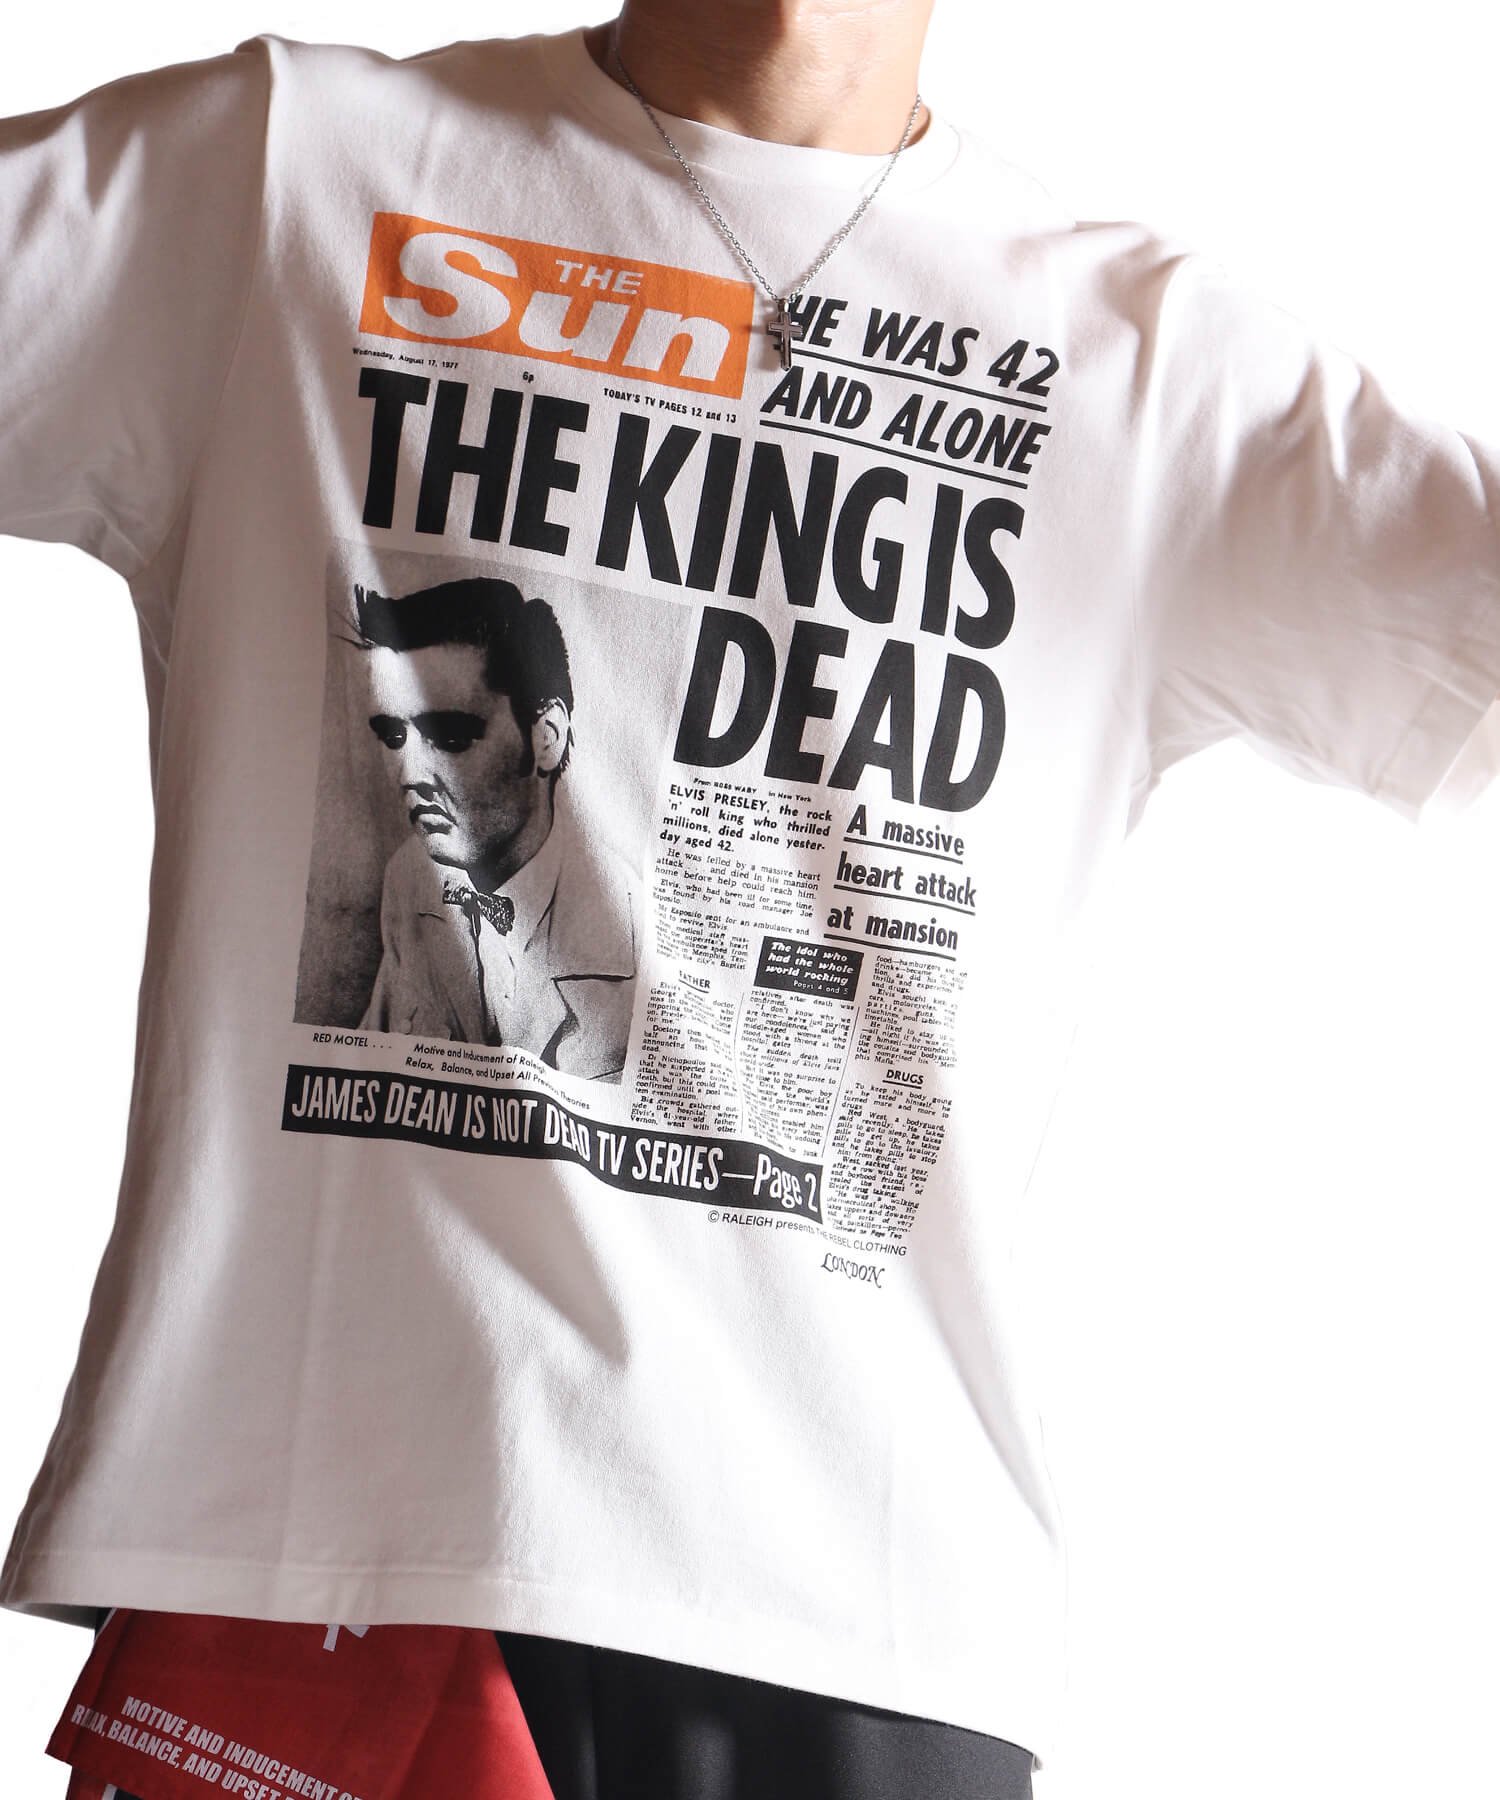 RALEIGH / ラリー（RED MOTEL / レッドモーテル） ｜ Obituary in a Newspaper ”THE KING IS DEAD” T-SHIRTS (WH)　商品画像12